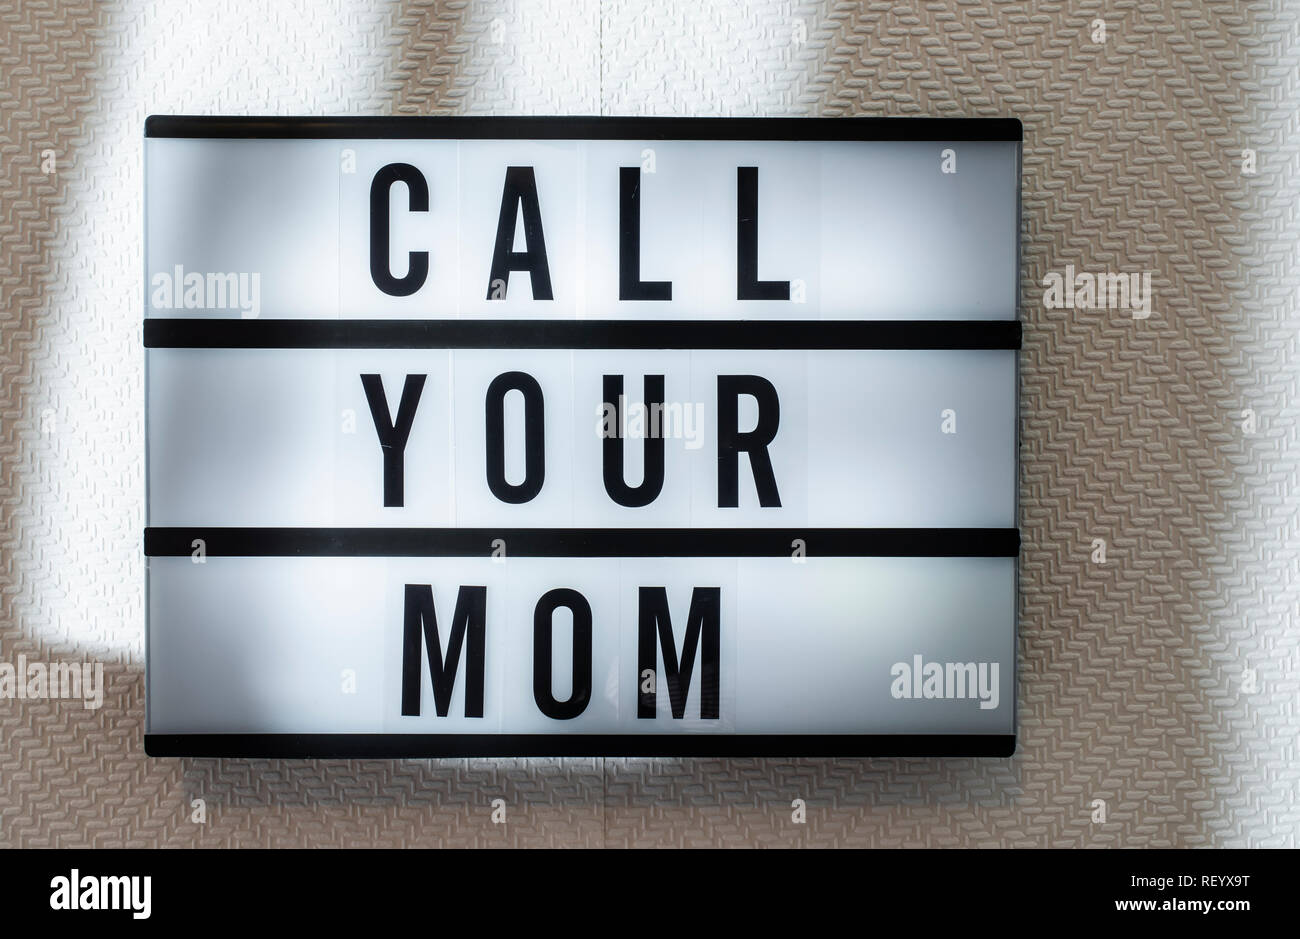 Download Show your mom some love this Mothers Day Wallpaper  Wallpapers com